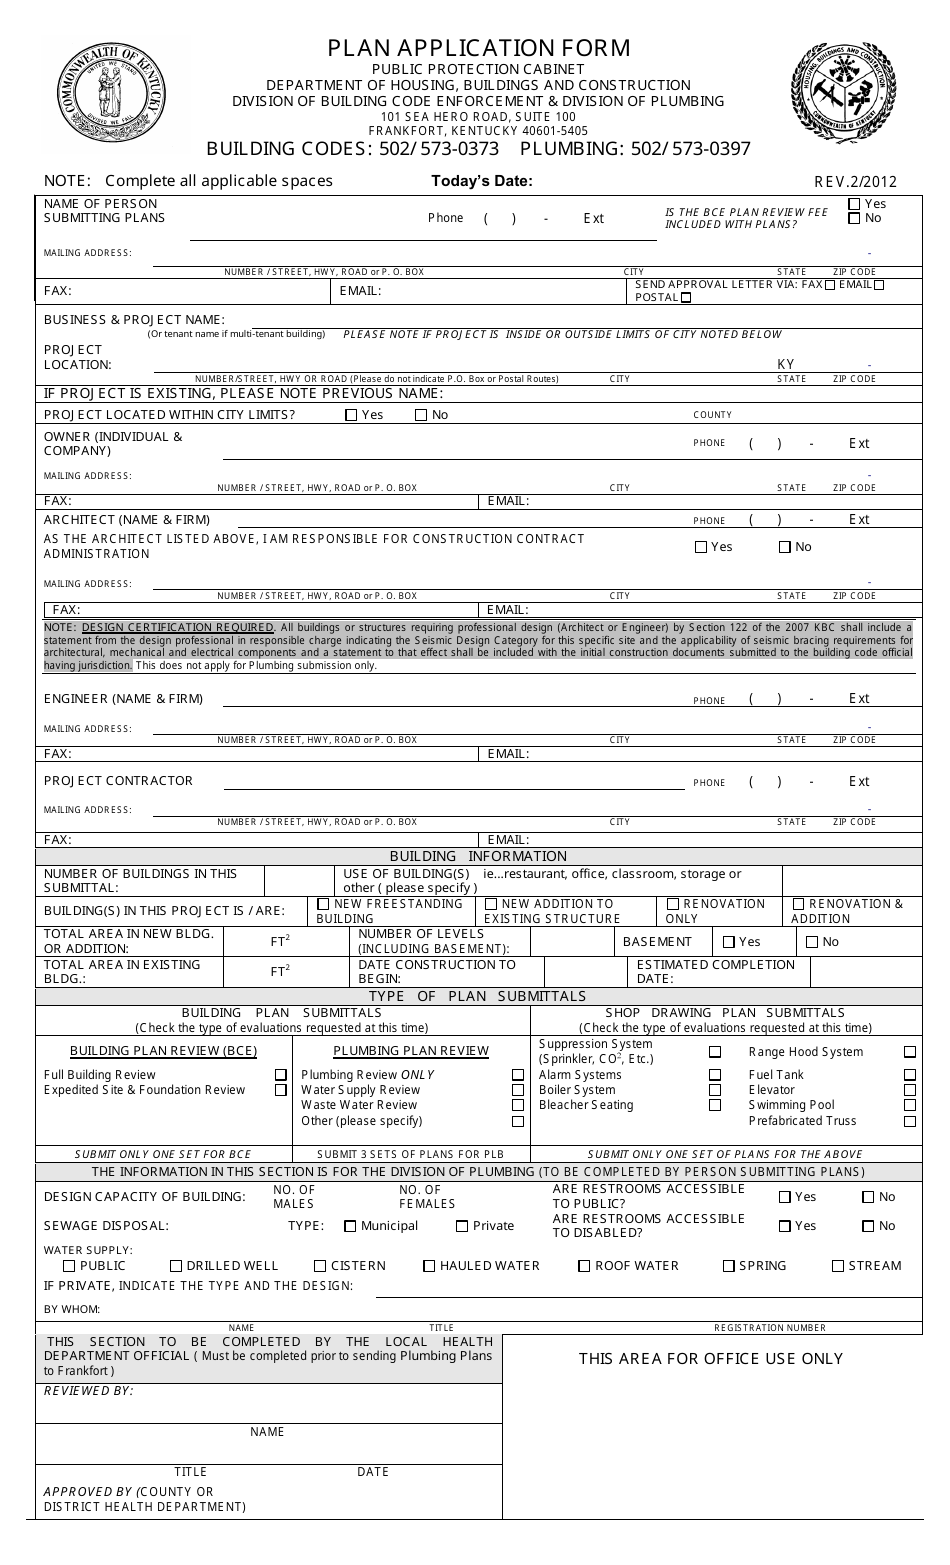 Kentucky Plan Application Form Fill Out Sign Online And Download Pdf Templateroller 4931